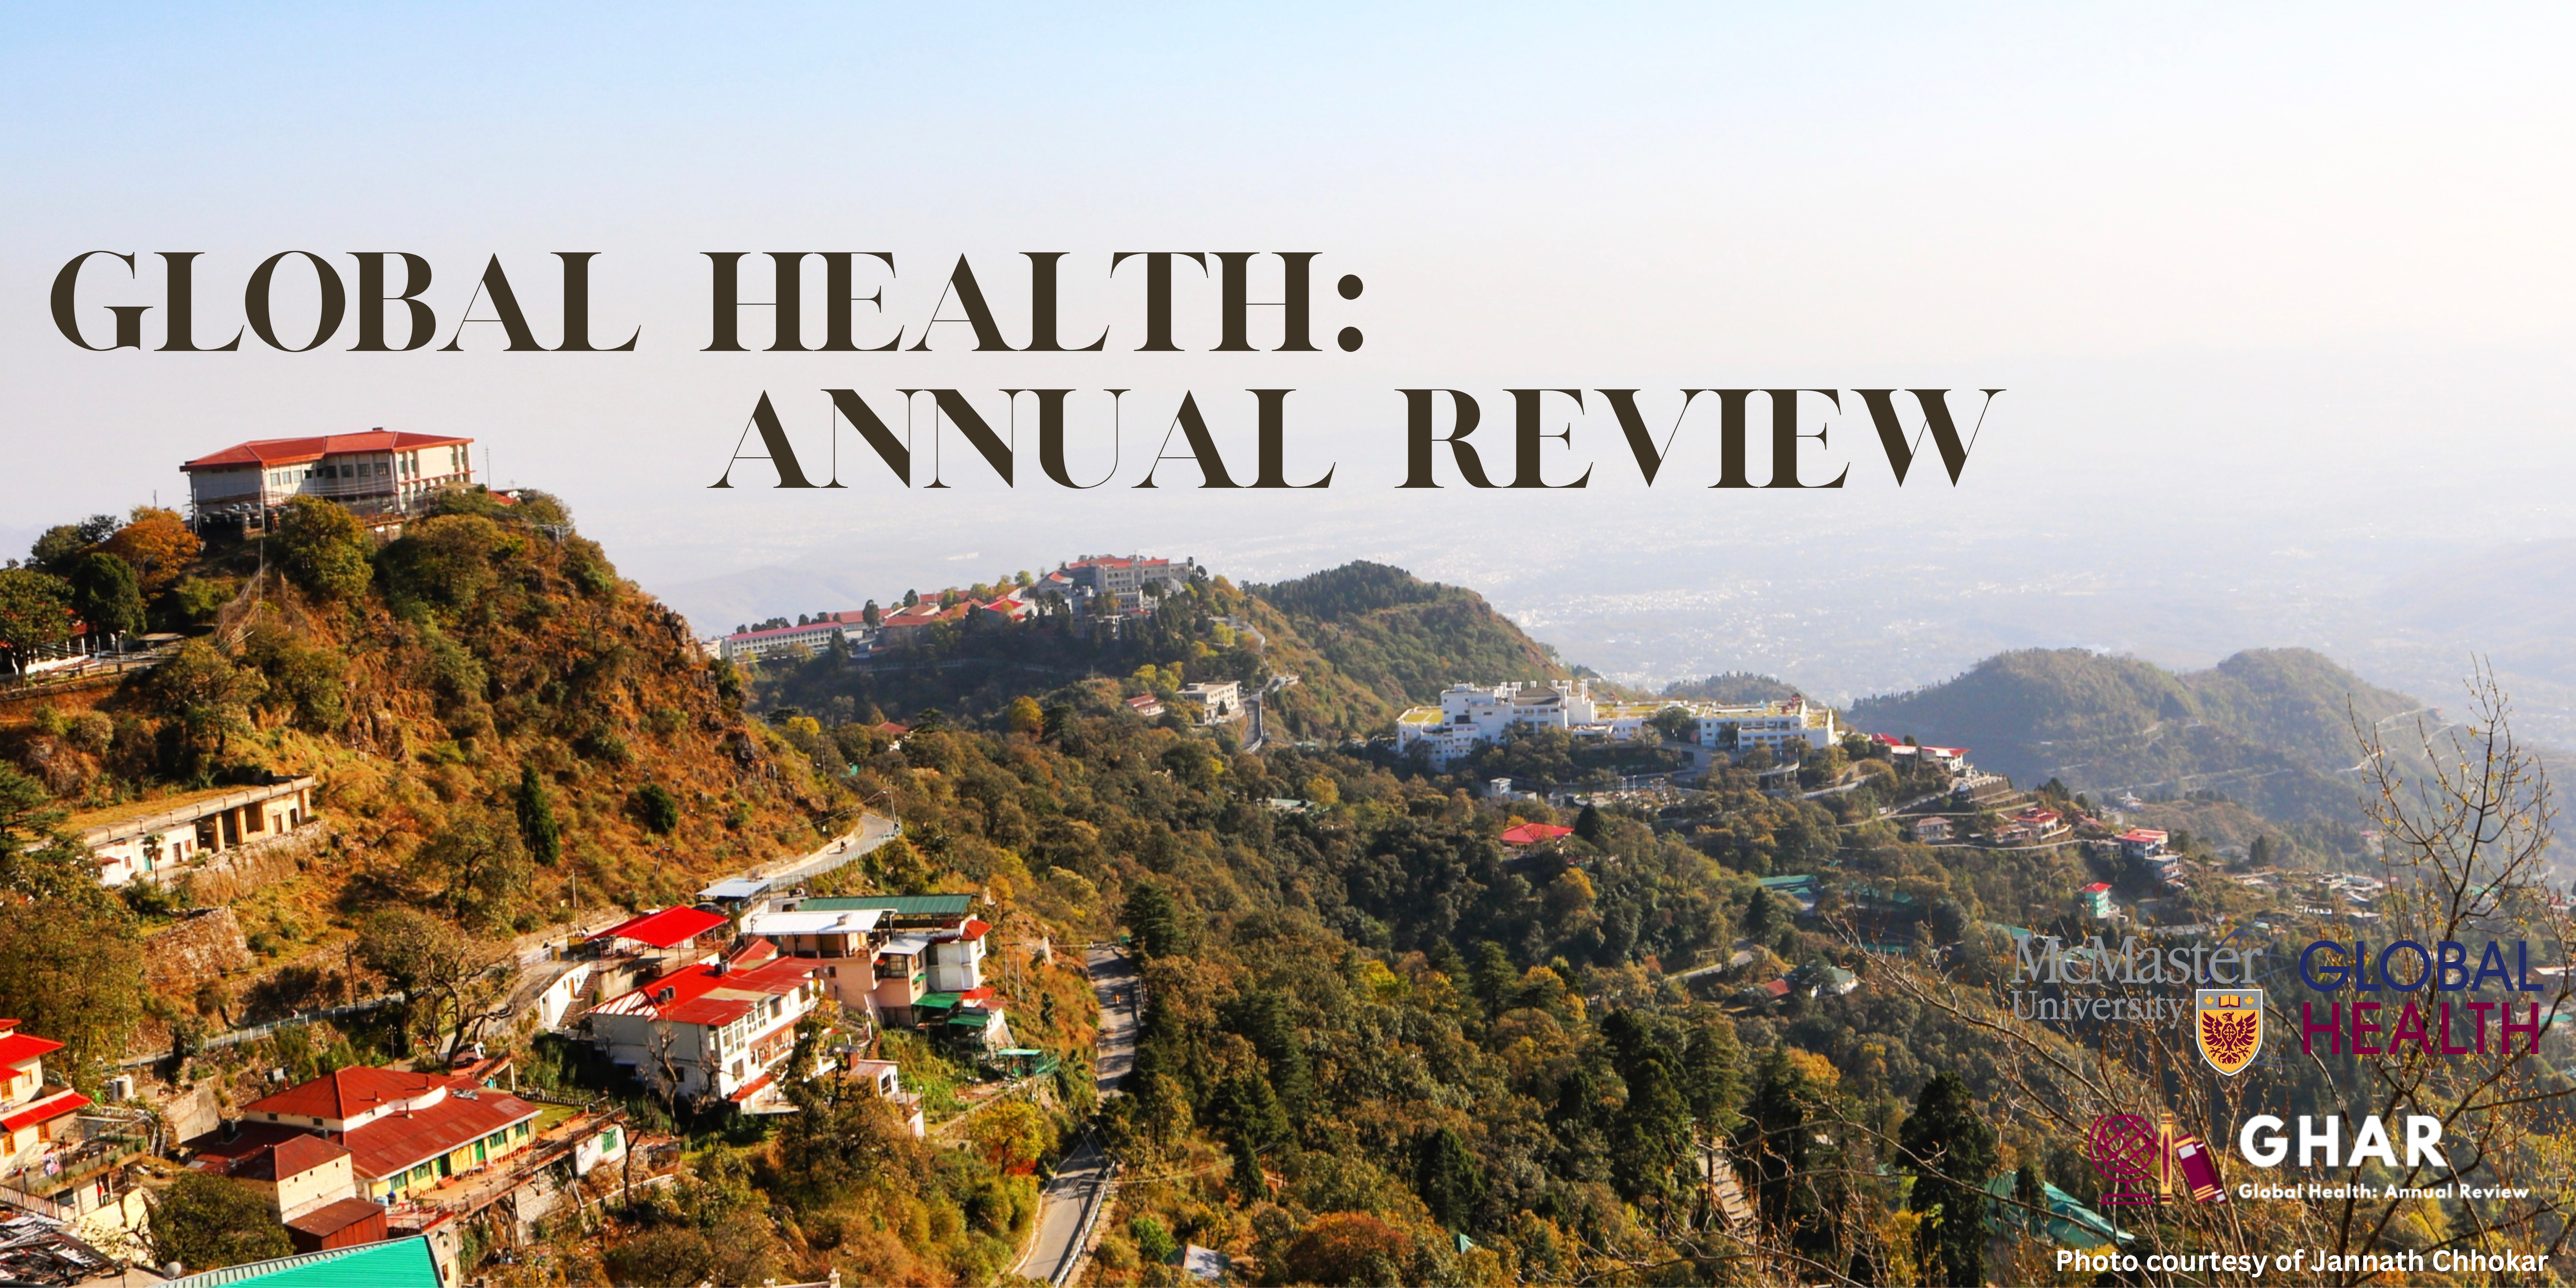 Global Health Annual Review